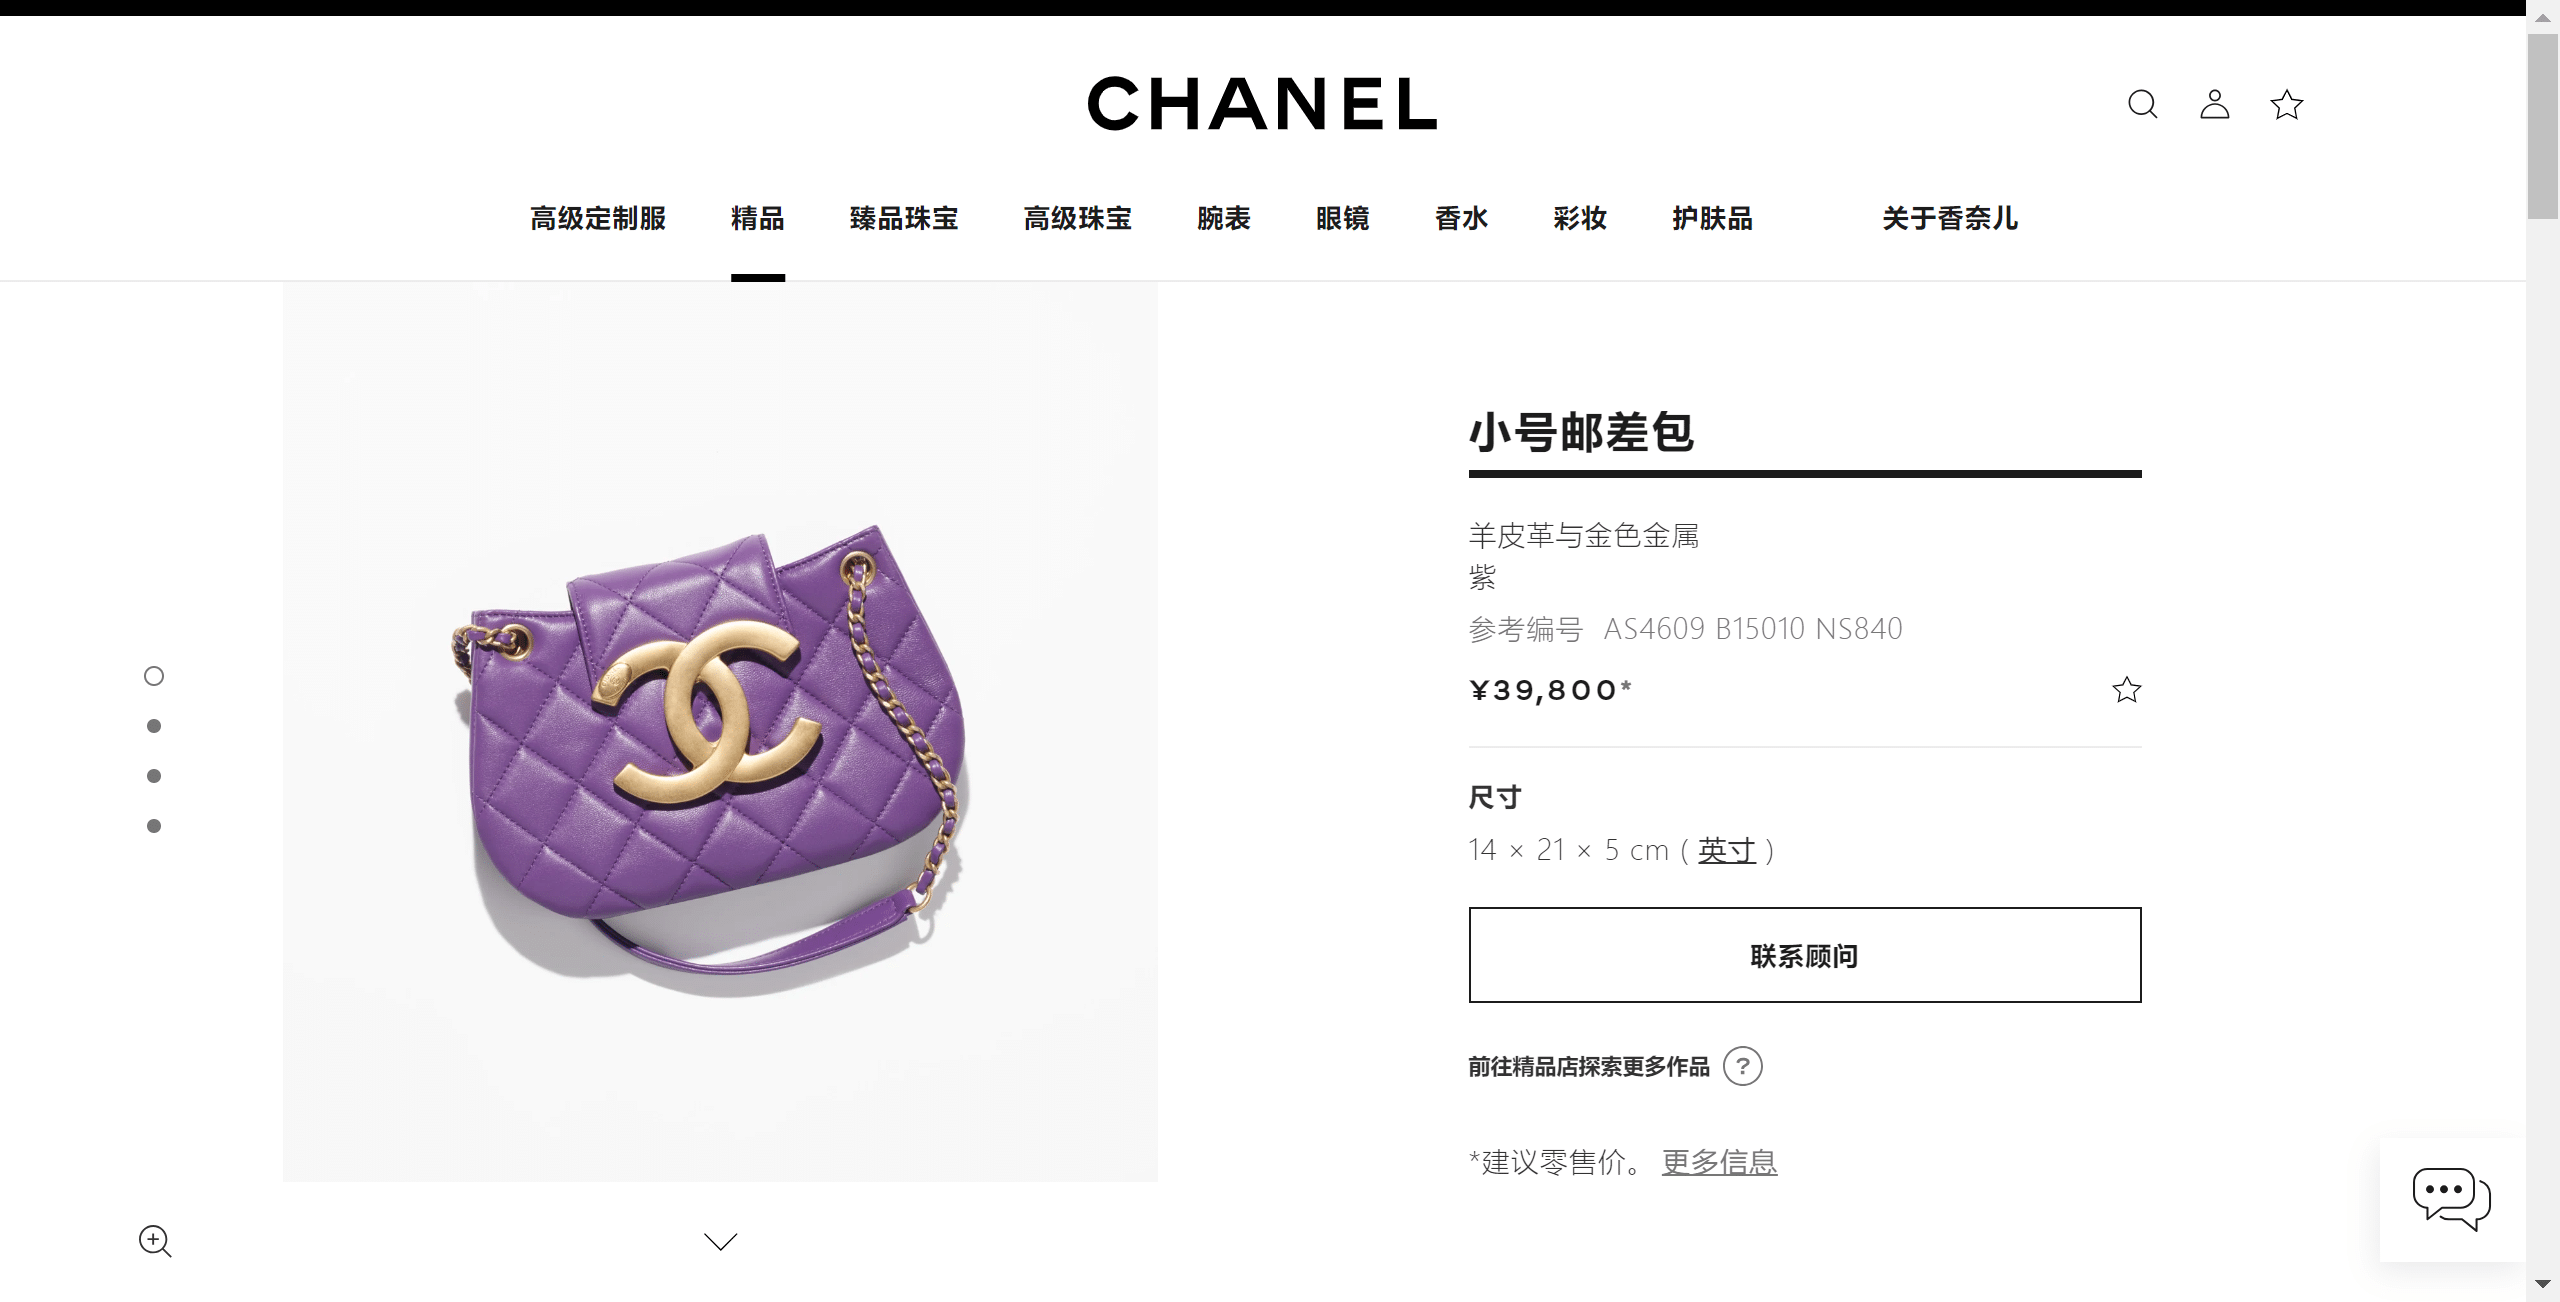 -----CHANEL-.png